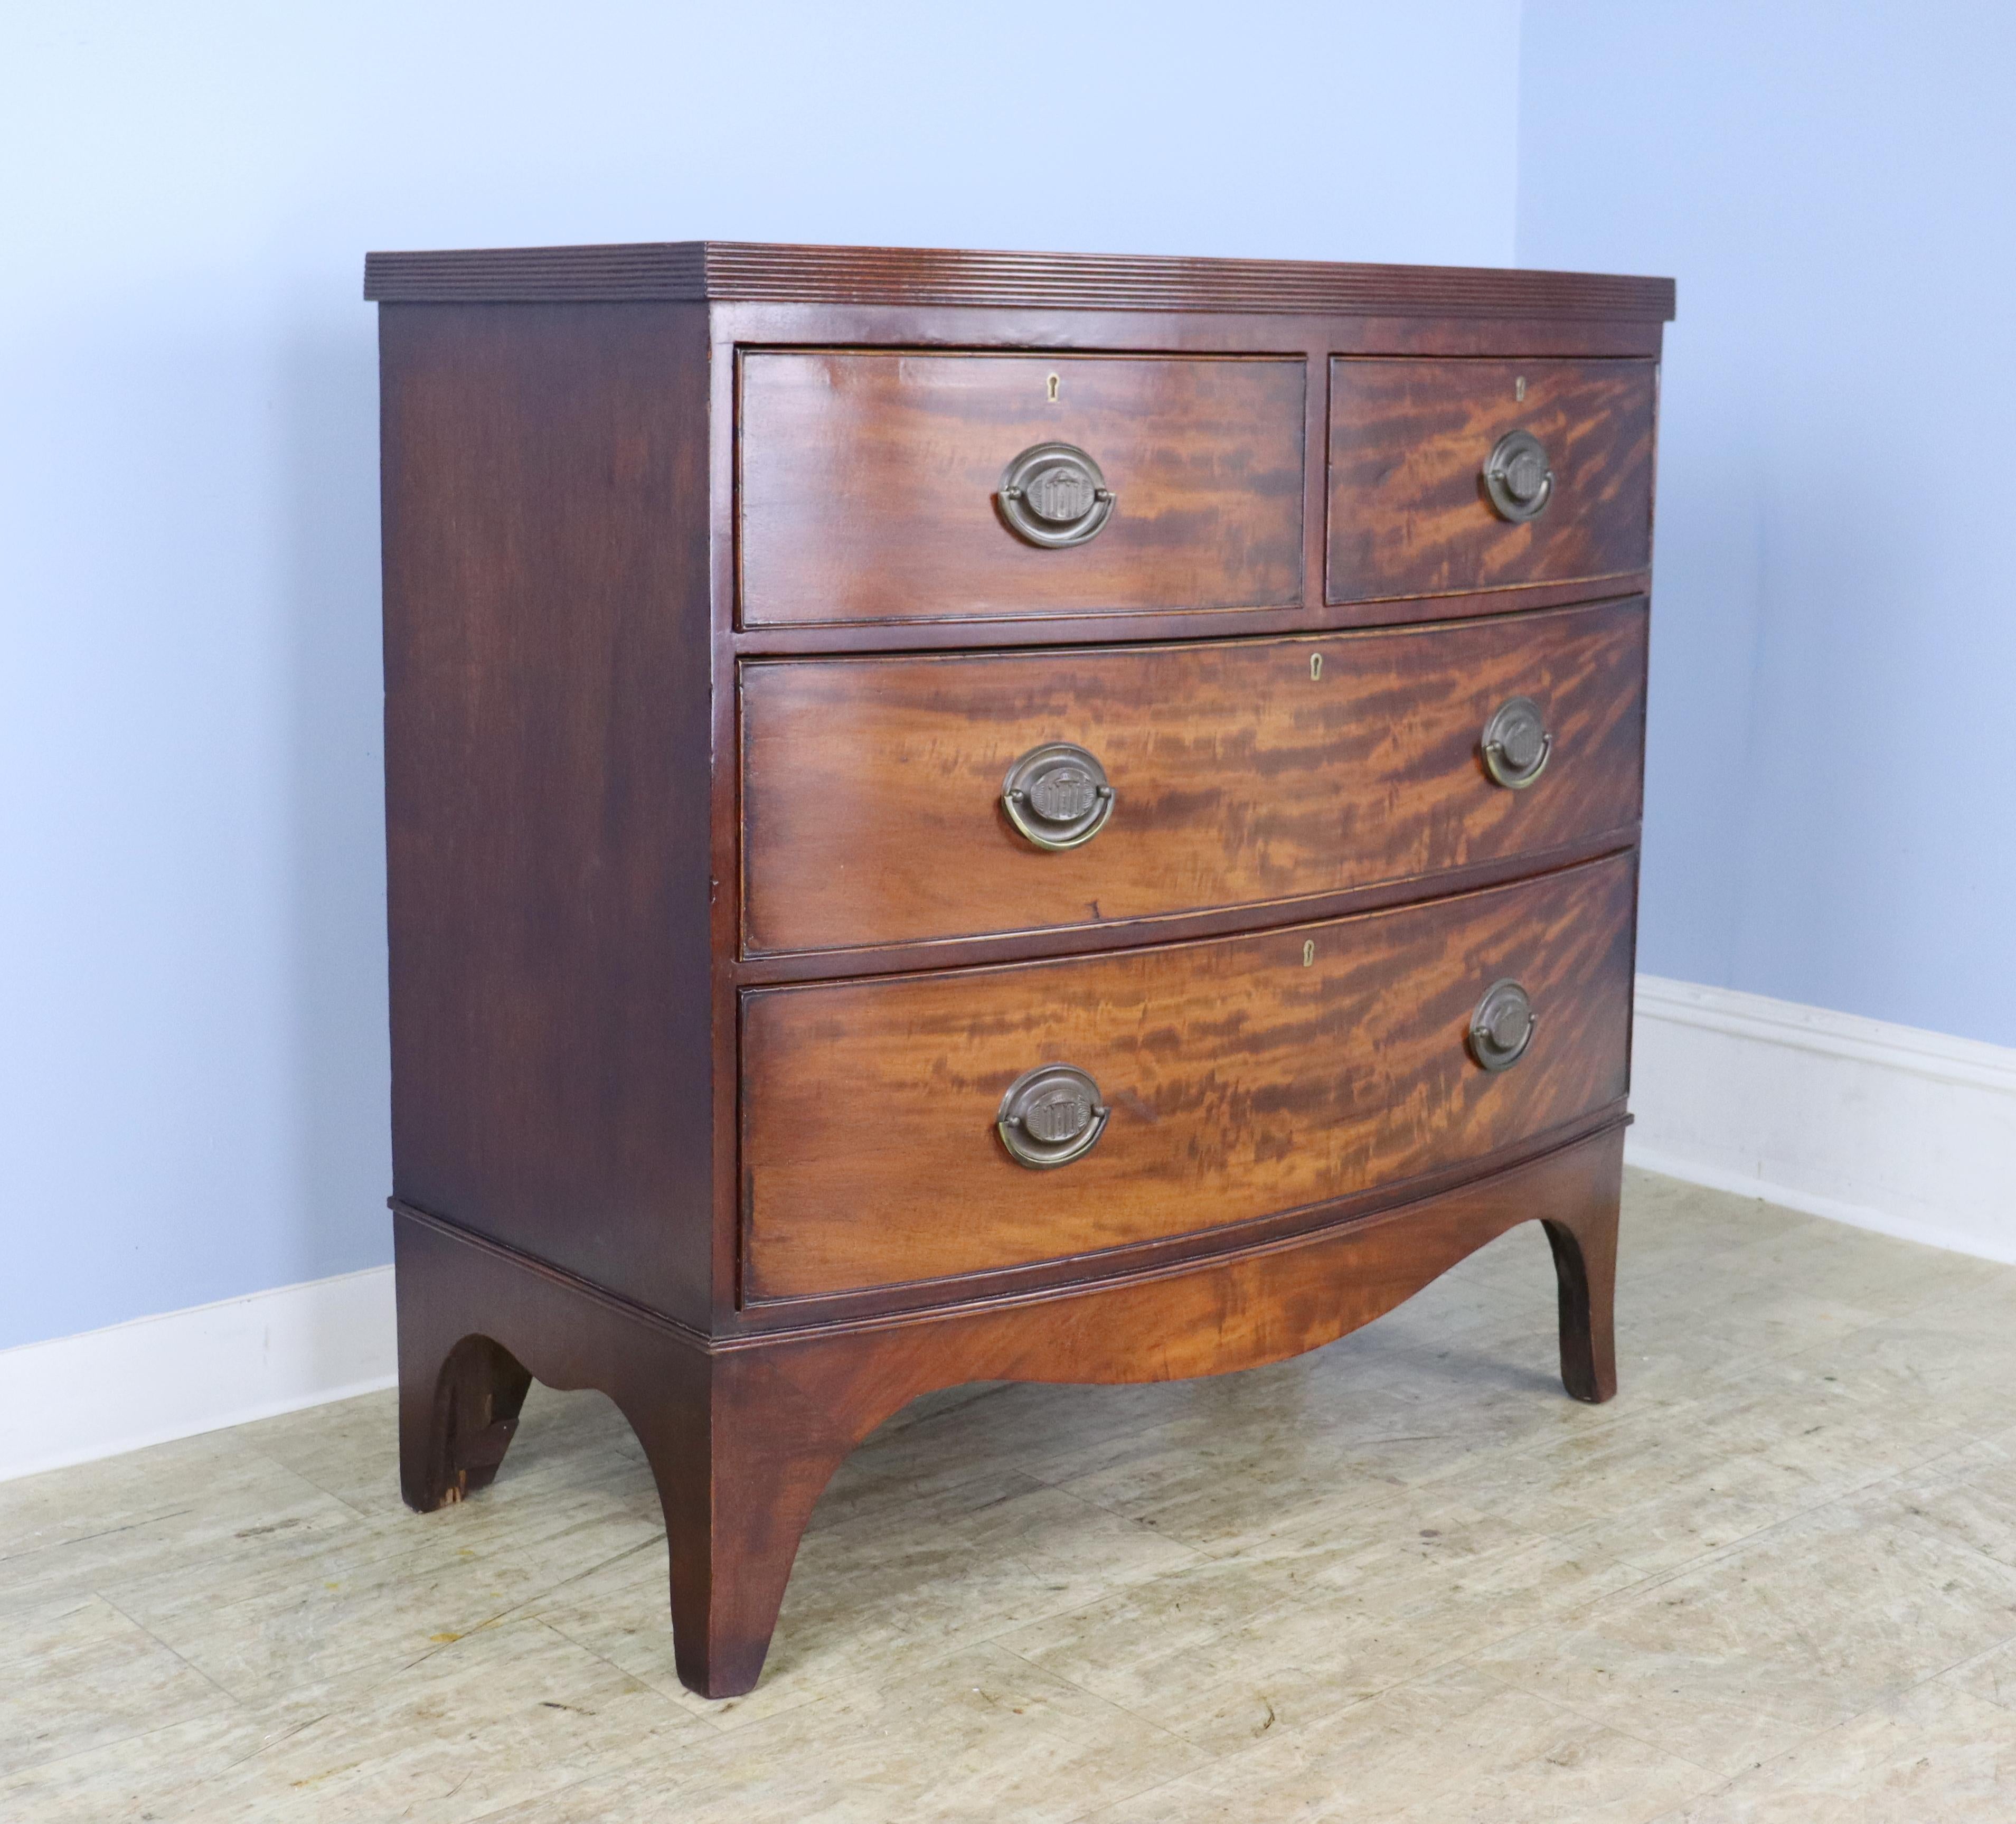 An antique bowfront bureau from England. Note the dramatic flame mahogany grain as well as the cockbeaded edging around the drawers, which are quite clean on the interior. Wonderful detailed reeded edge around the top. Original handles and feet.